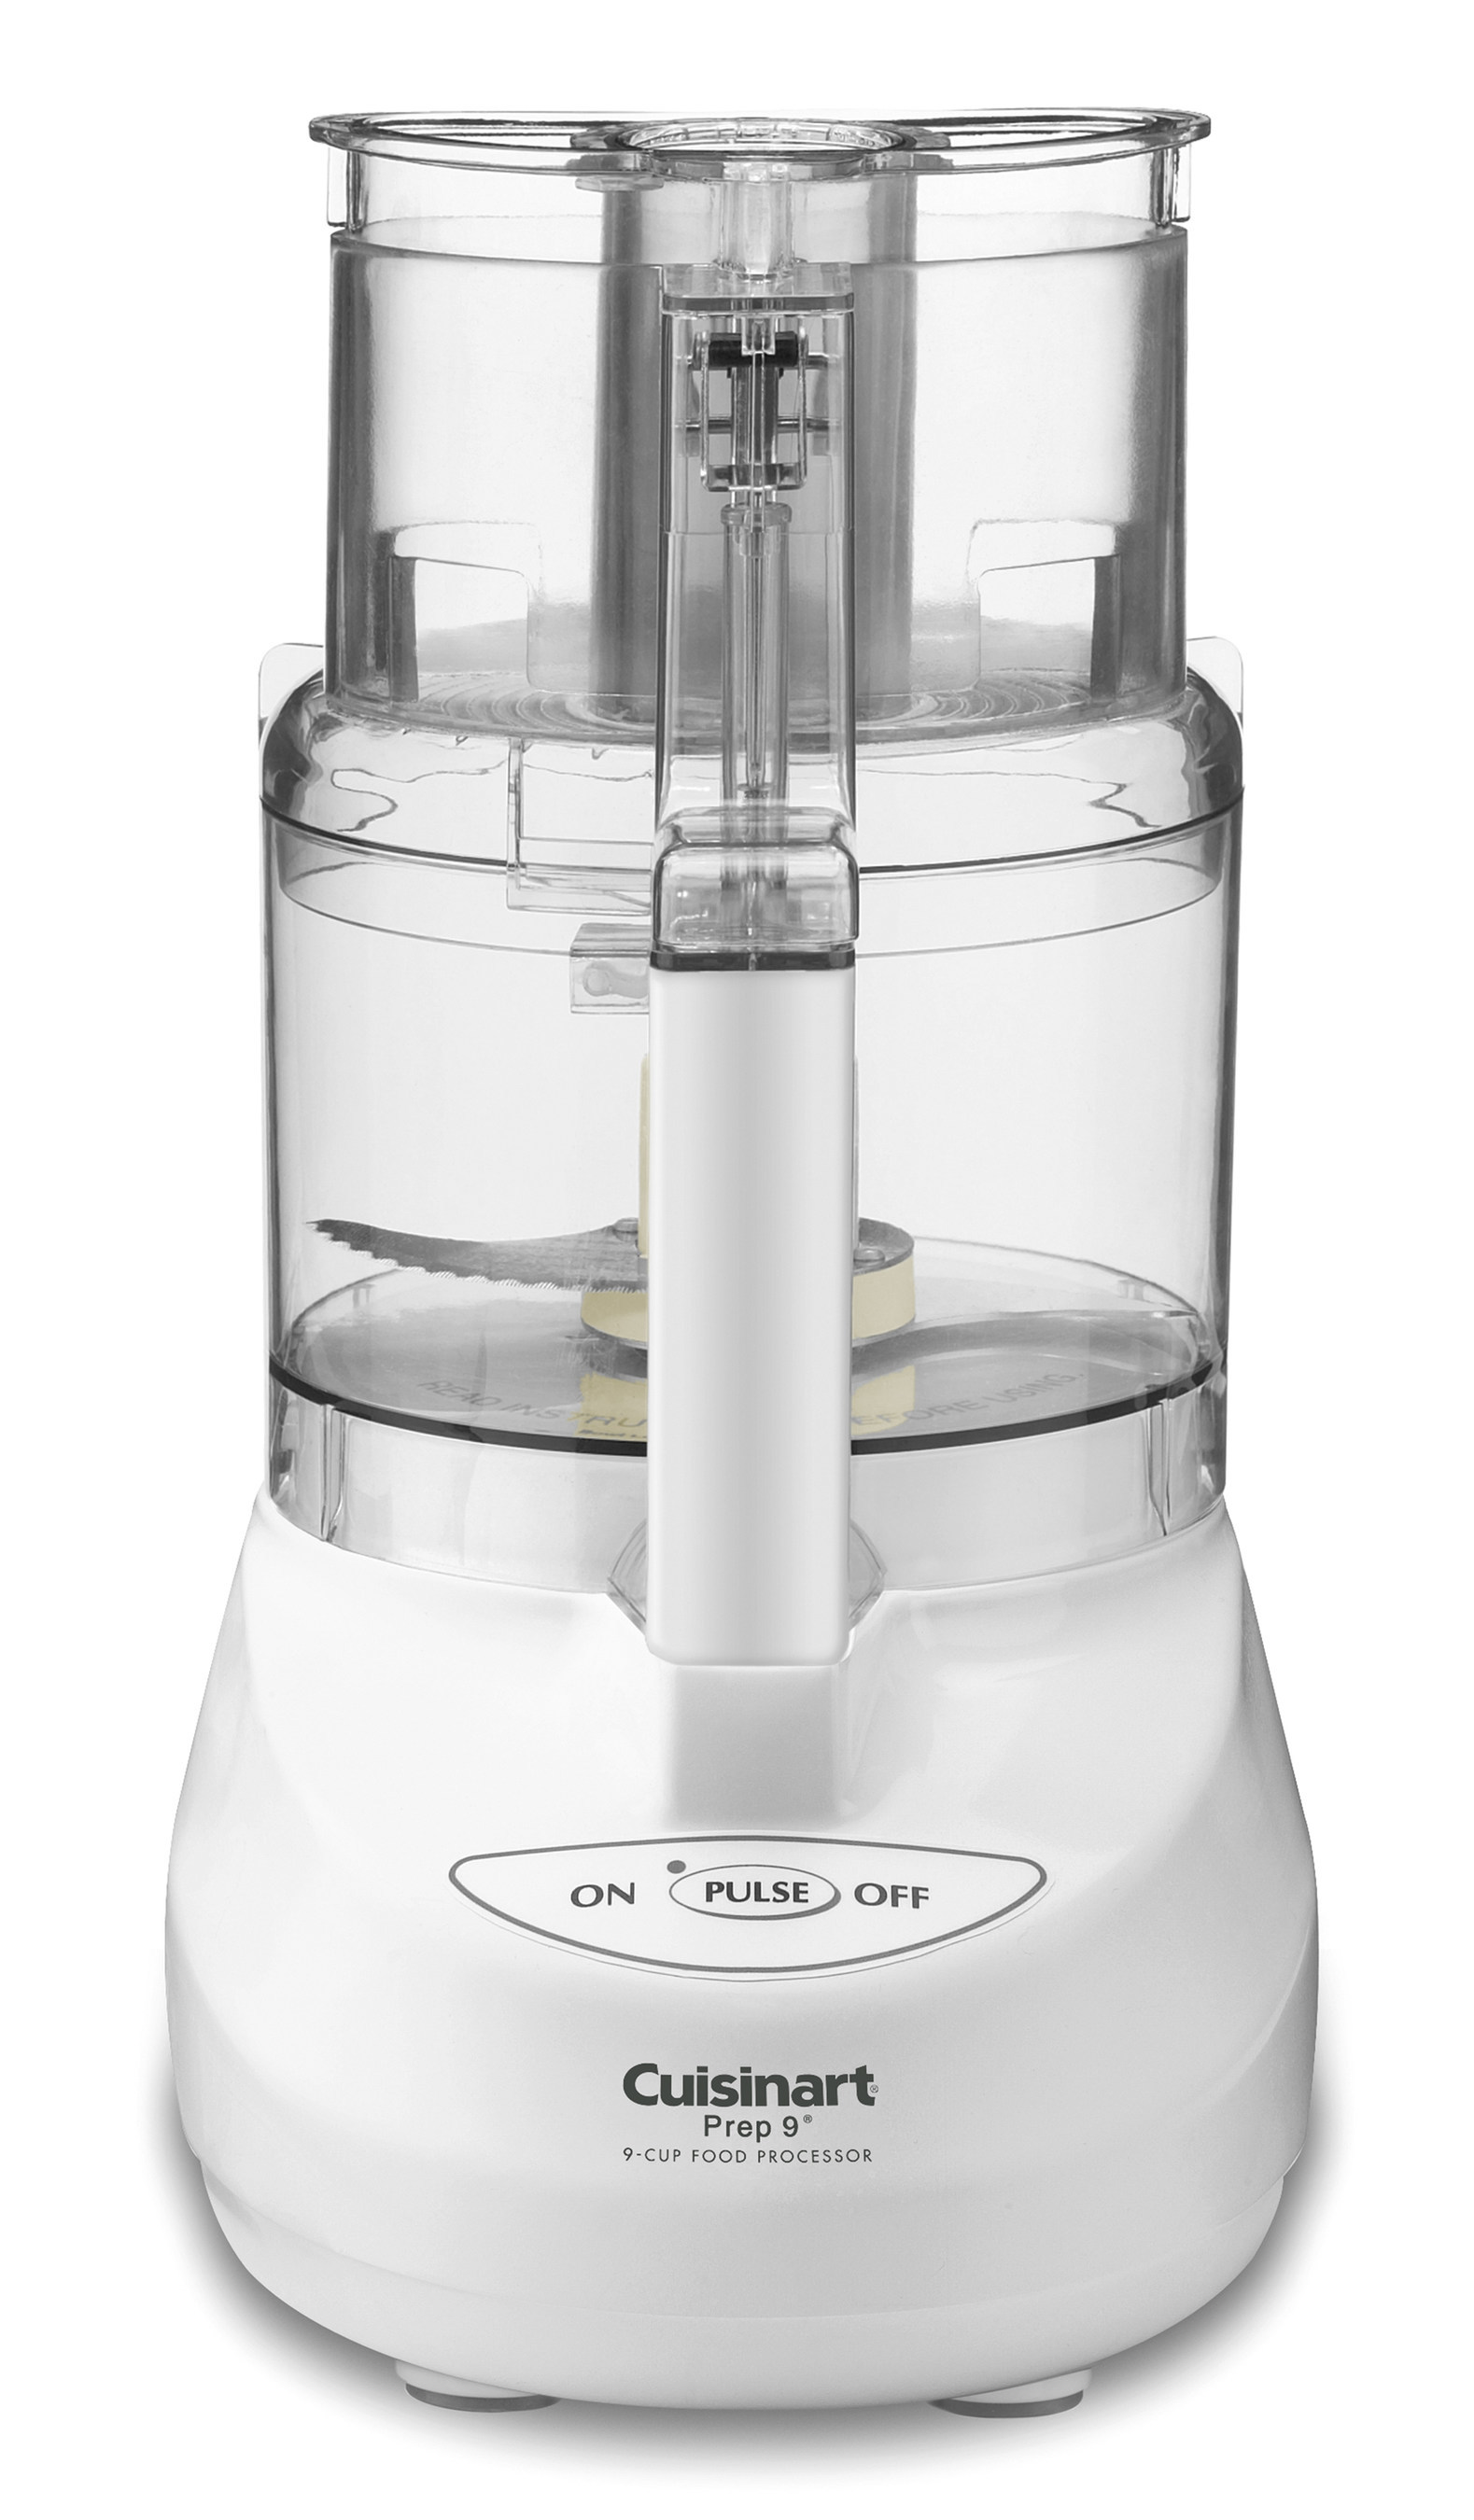 22 Models of Cuisinart Food Processors Recalled After Reports of Blade  Breaking Off - ABC News